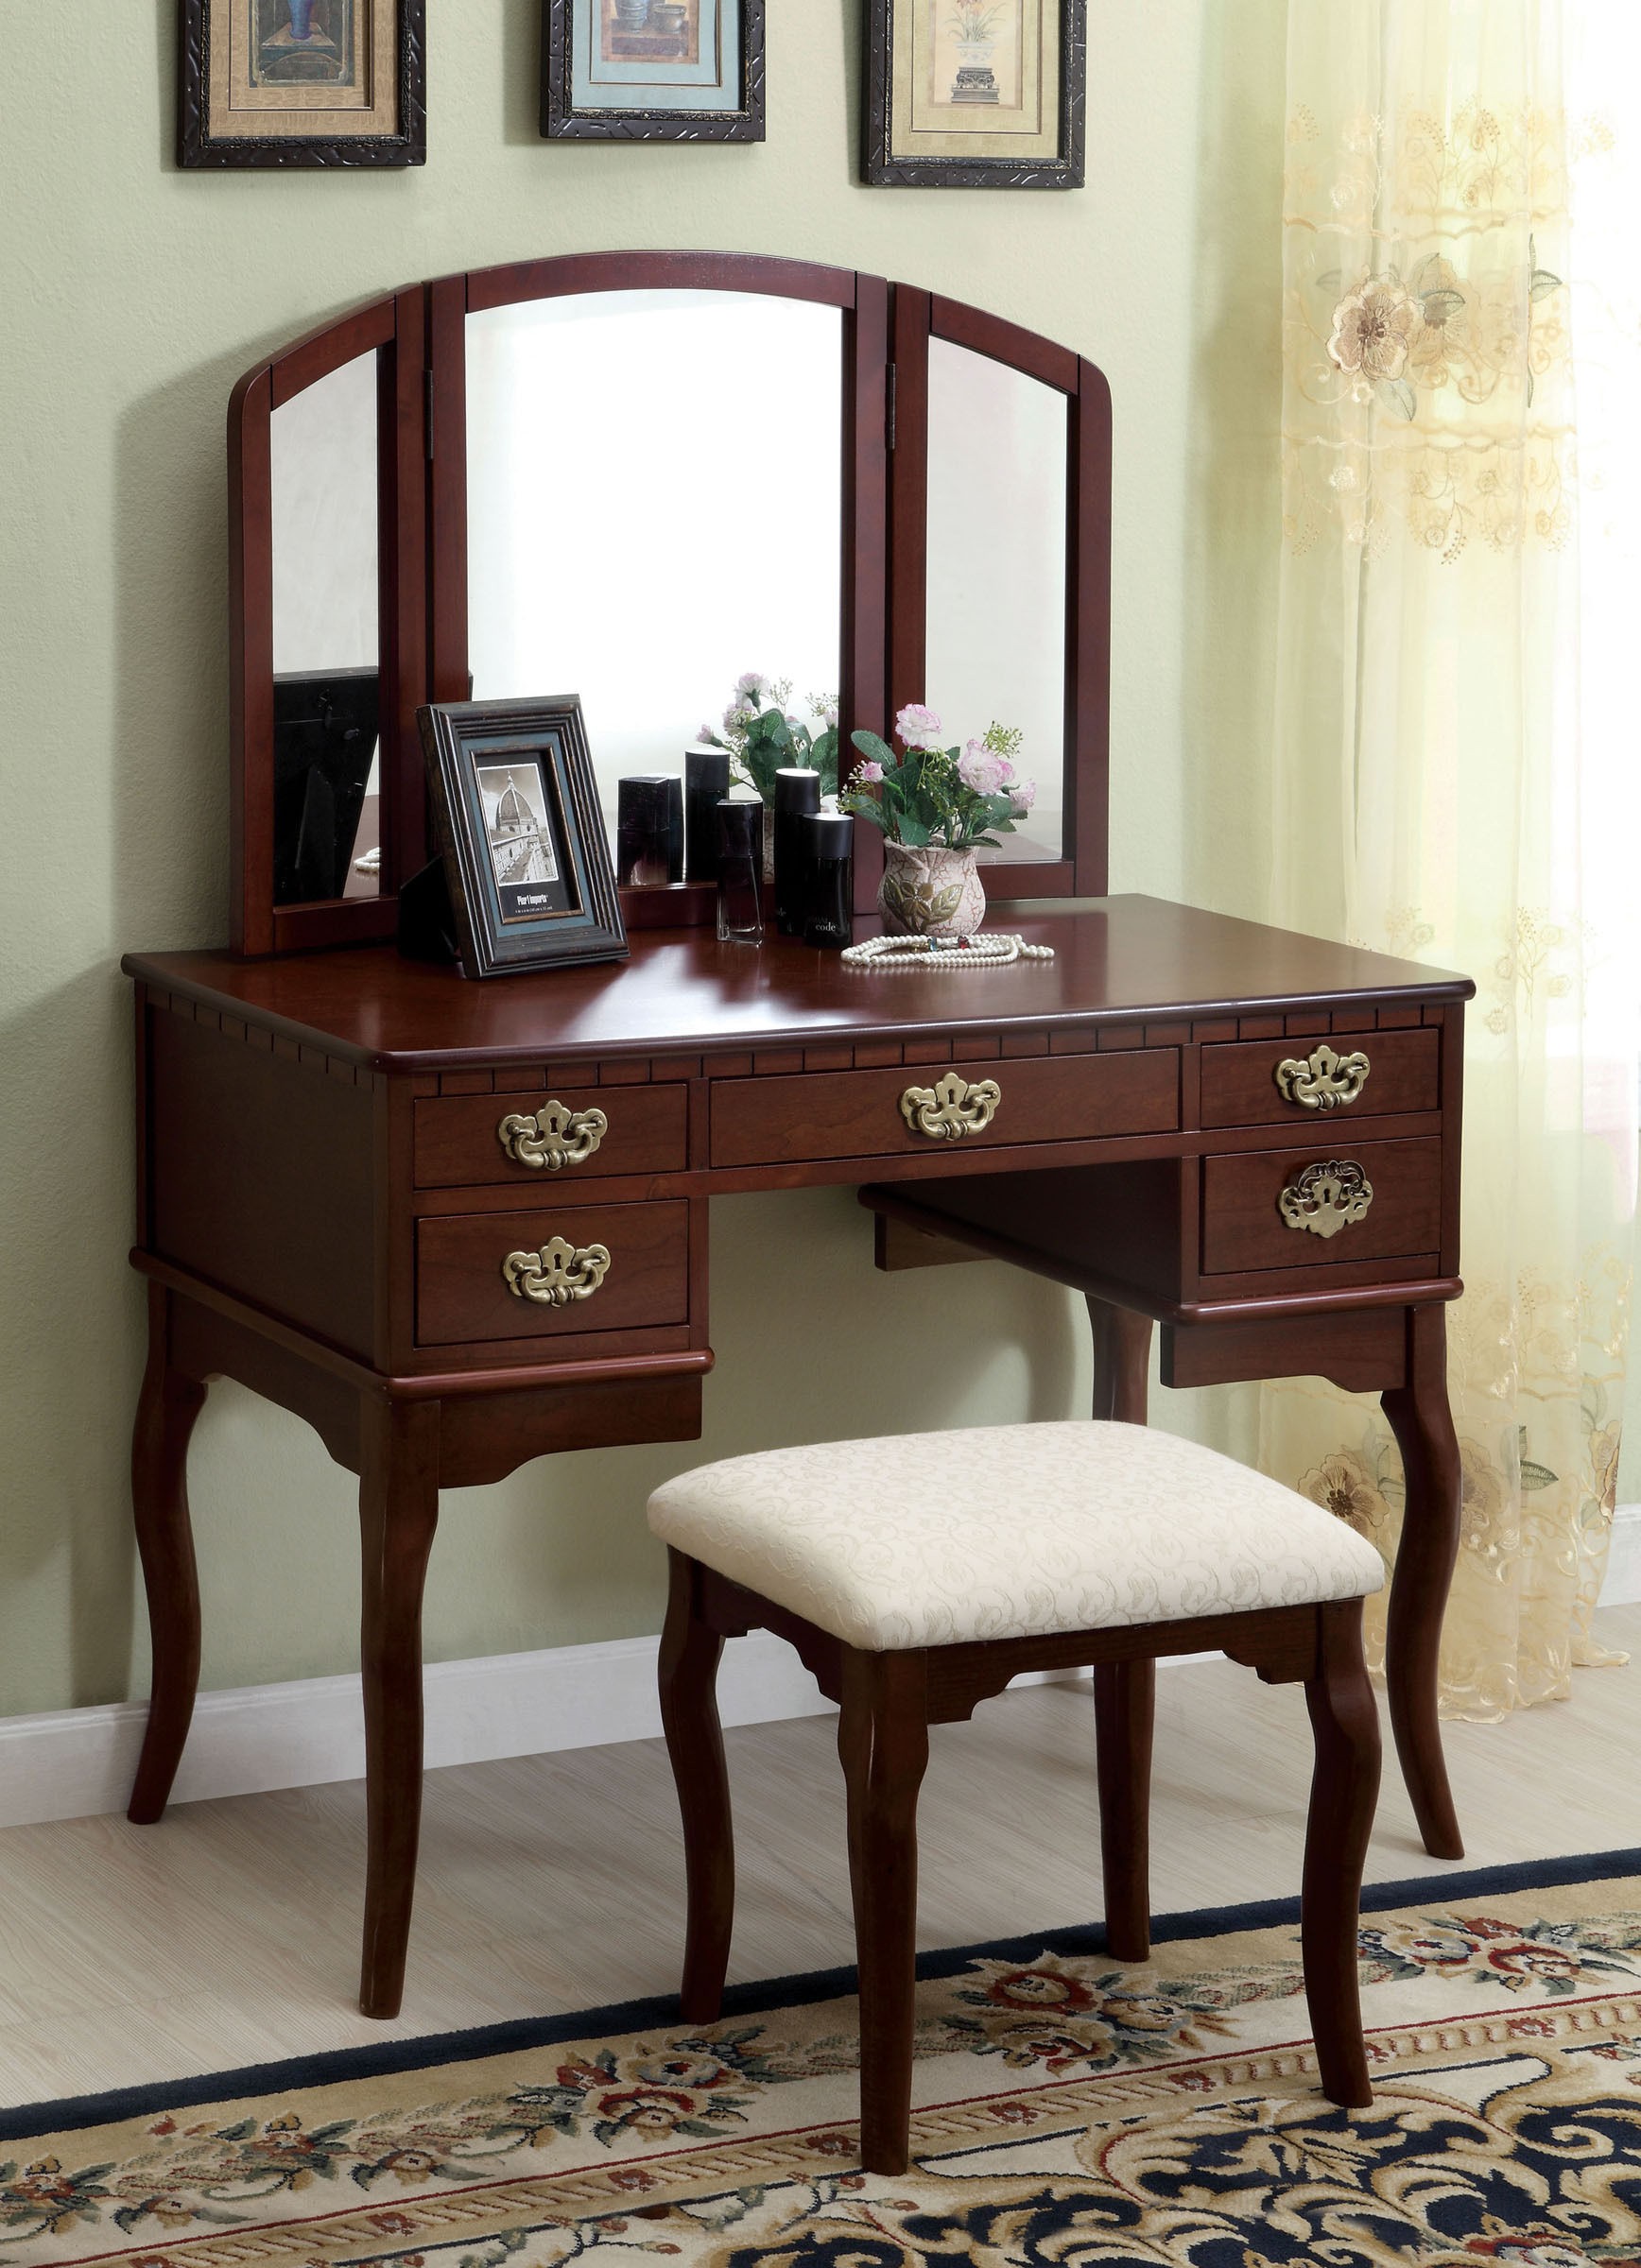 Furniture of America Matilda Chippendale Style Vanity and Stool Set, Cherry